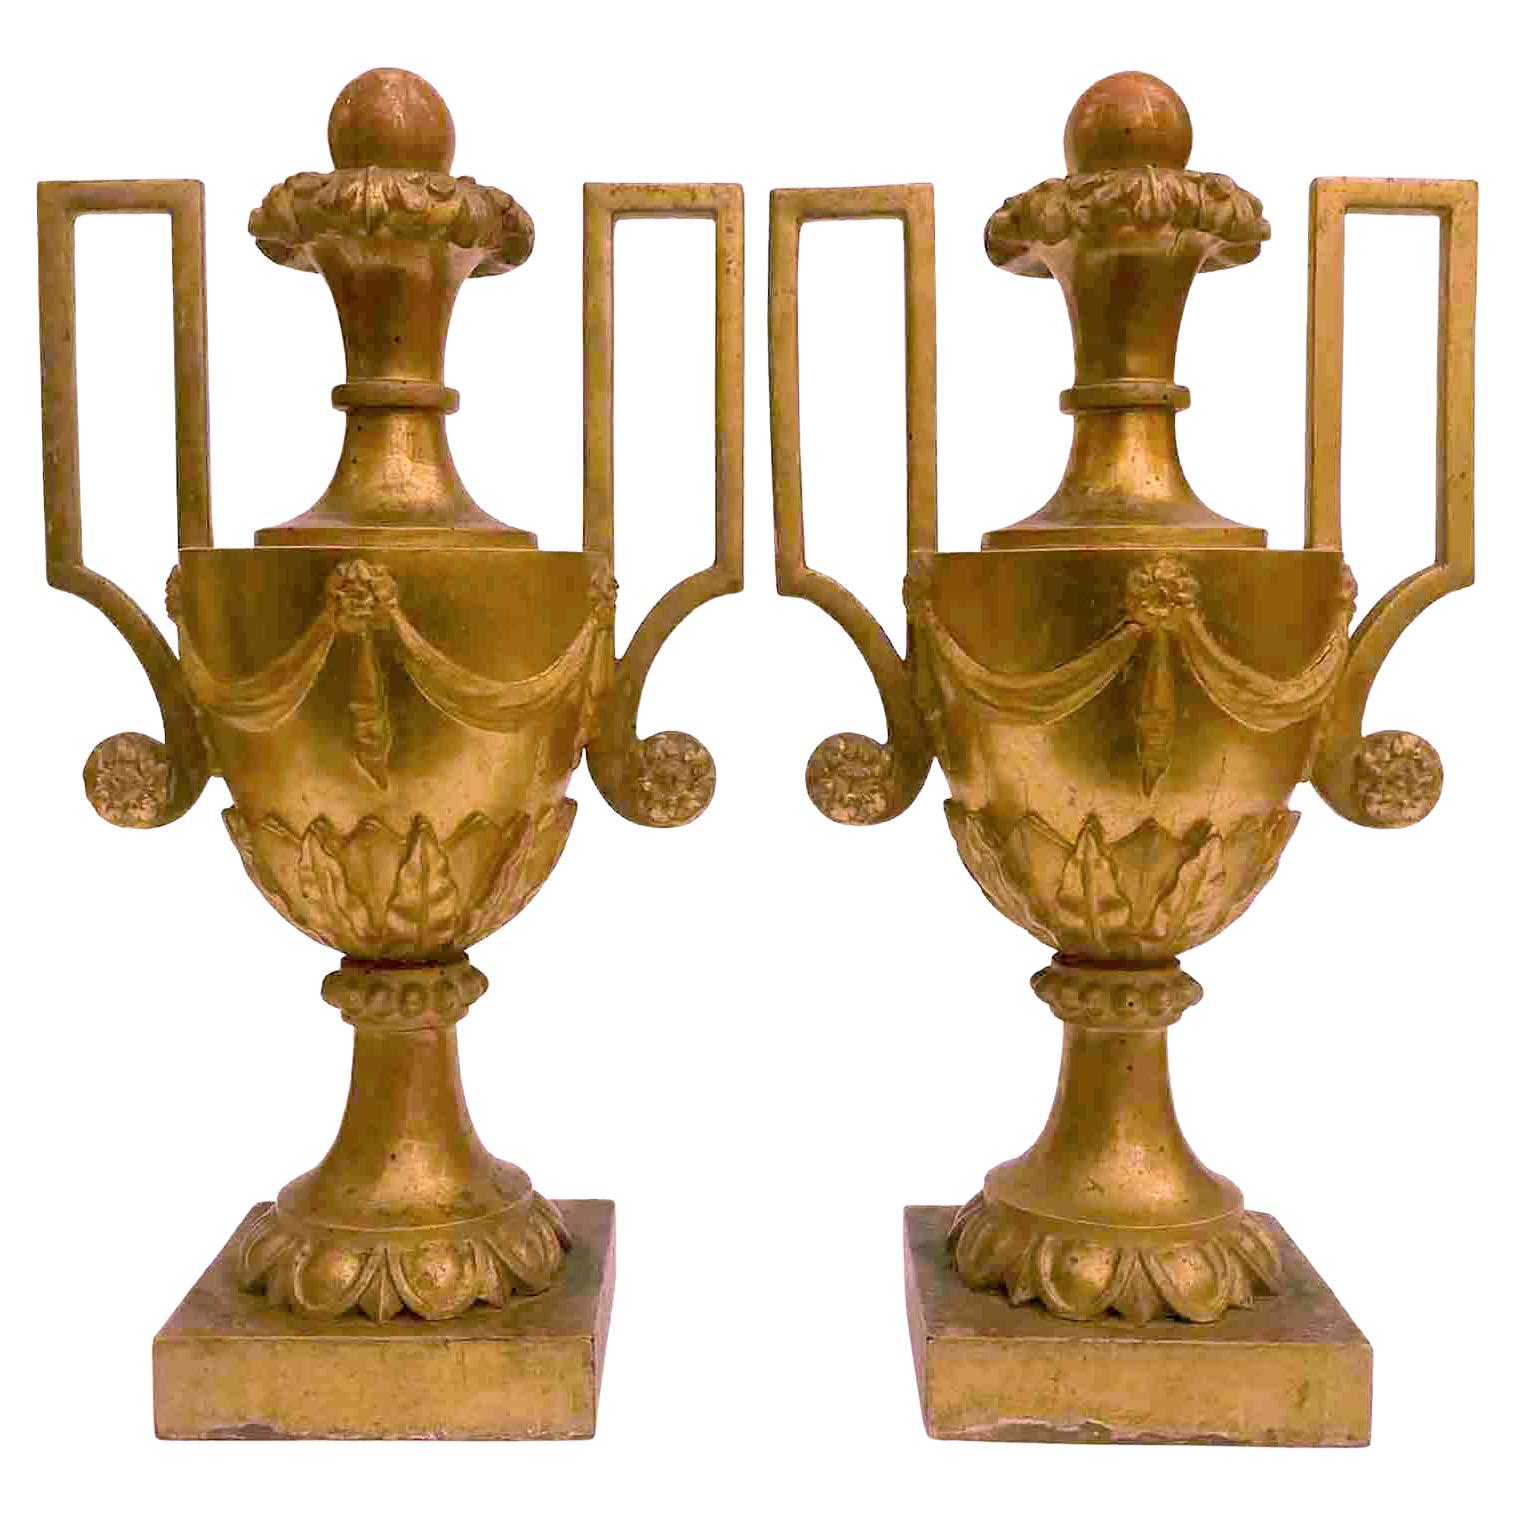 18th Century Large Pair of Italian Gilded Handled Vases Neoclassical Carving